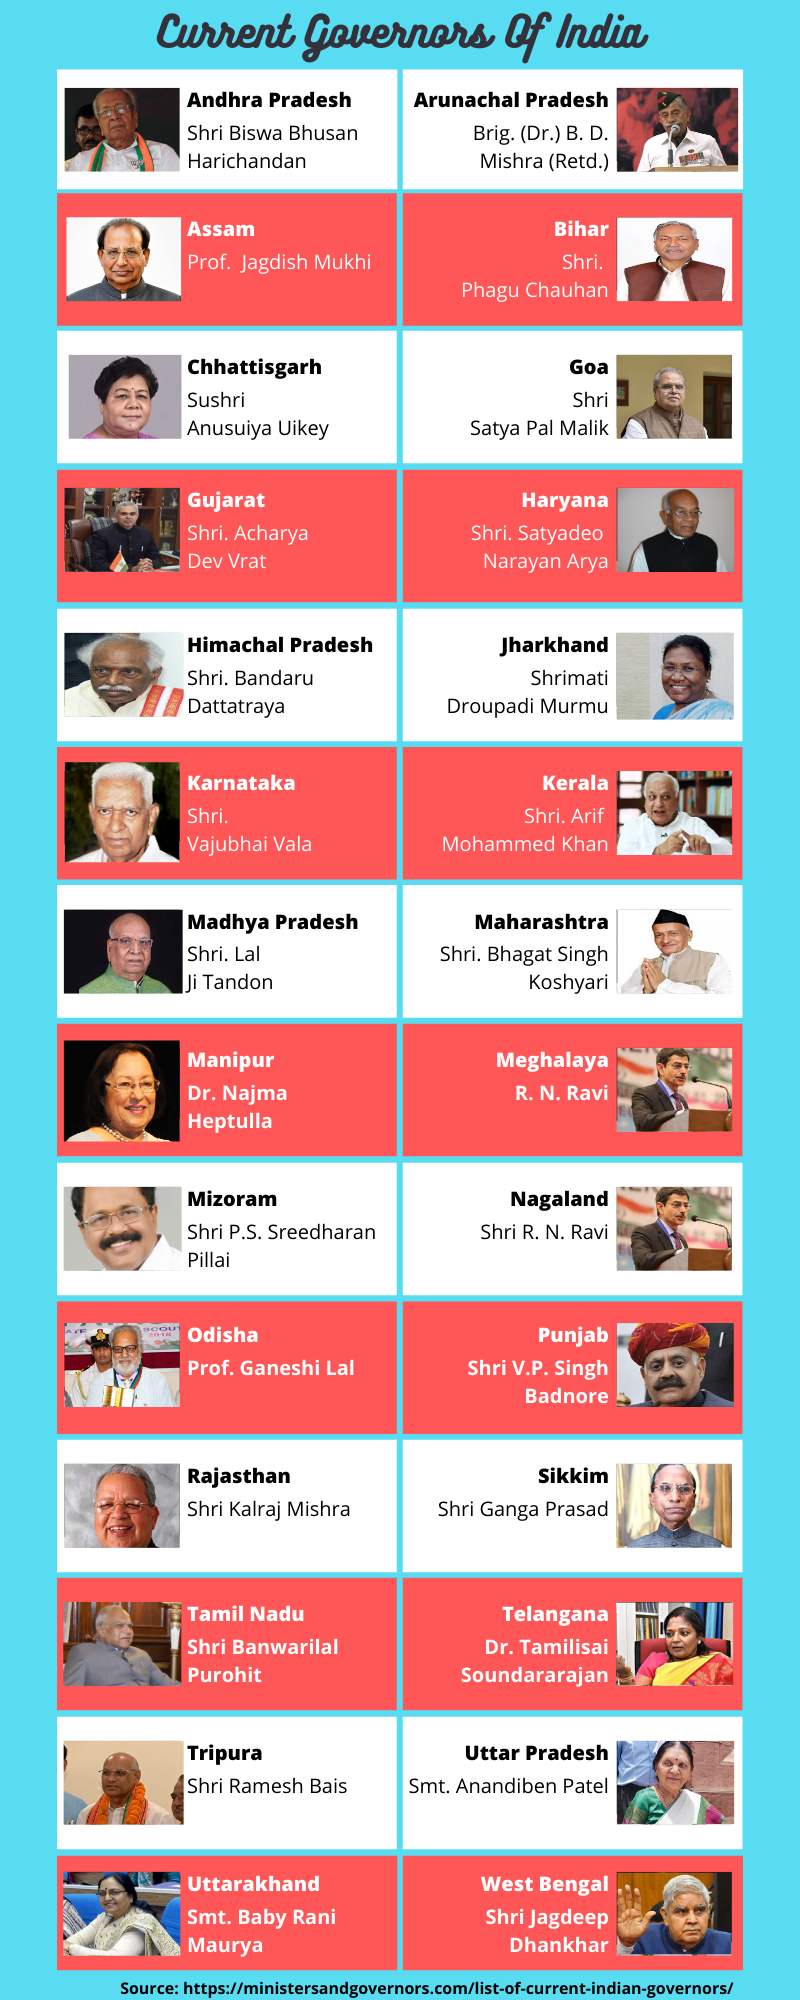 Current Governors of India